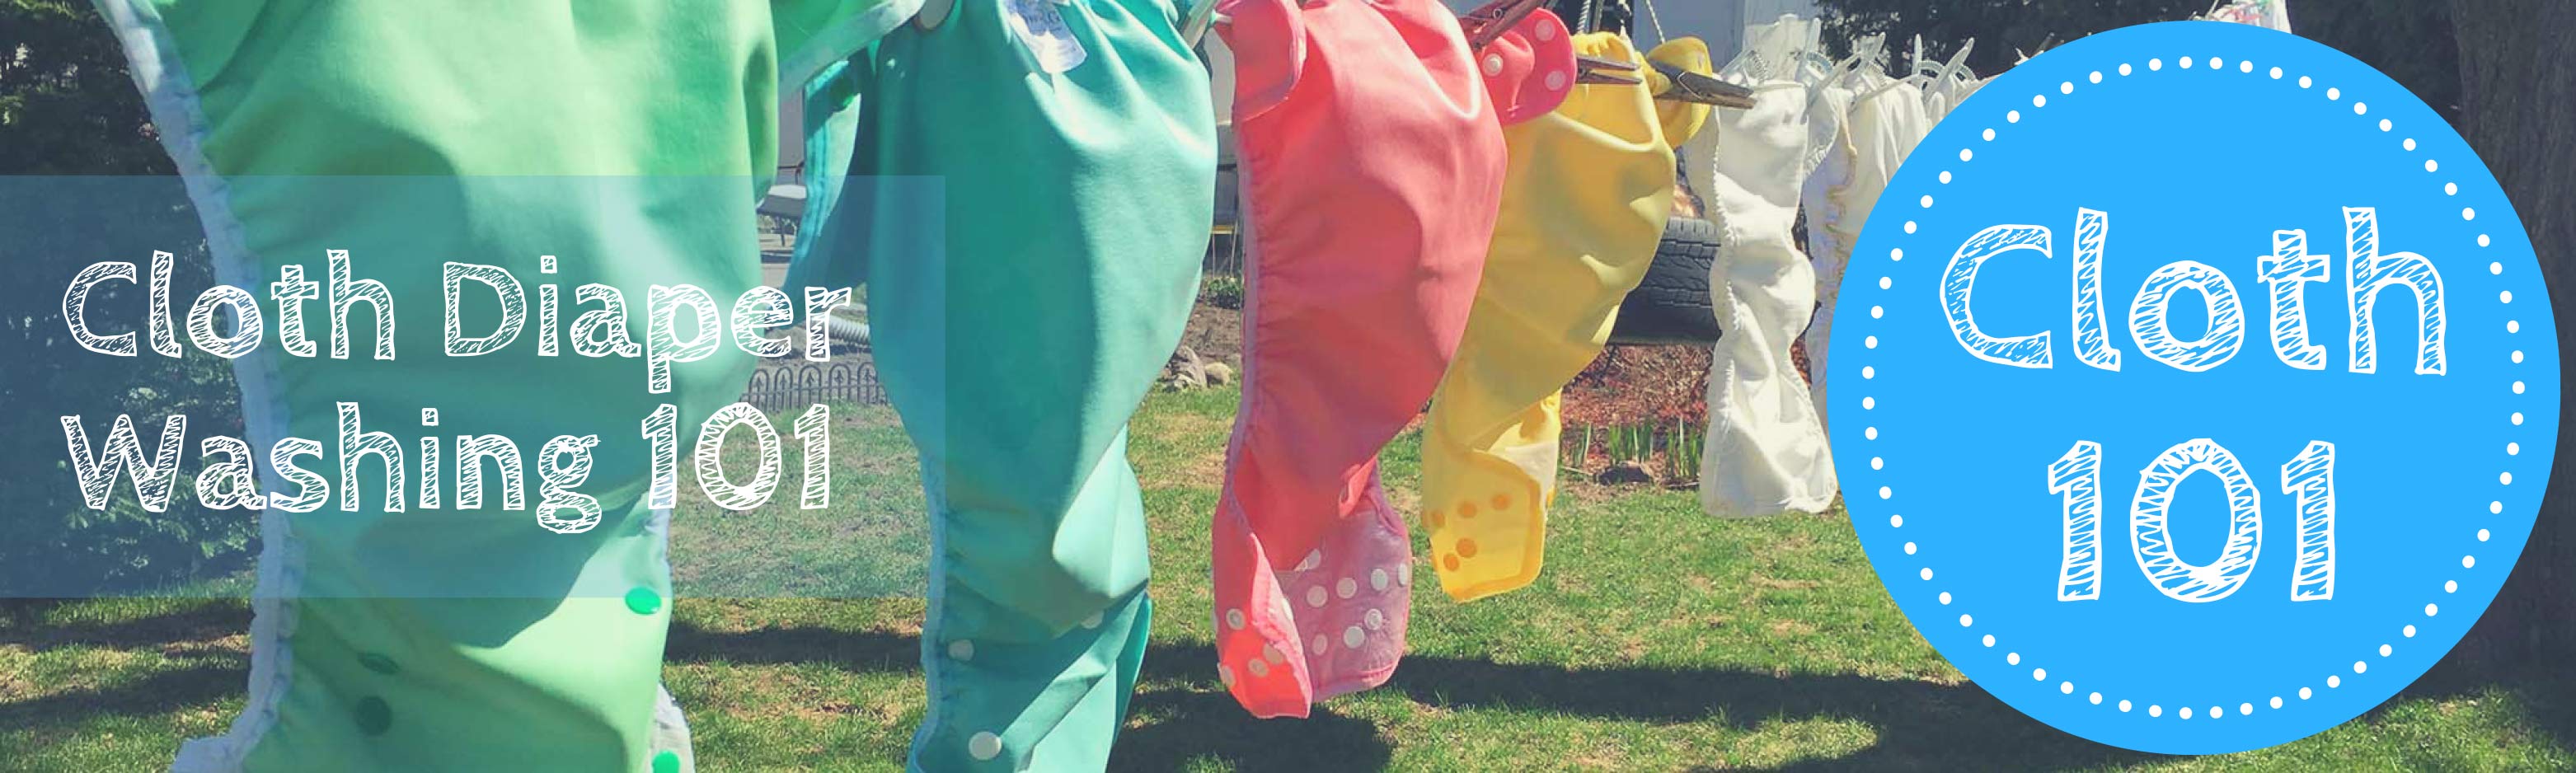 Mother-ease Cloth Diaper Washing 101 Blog